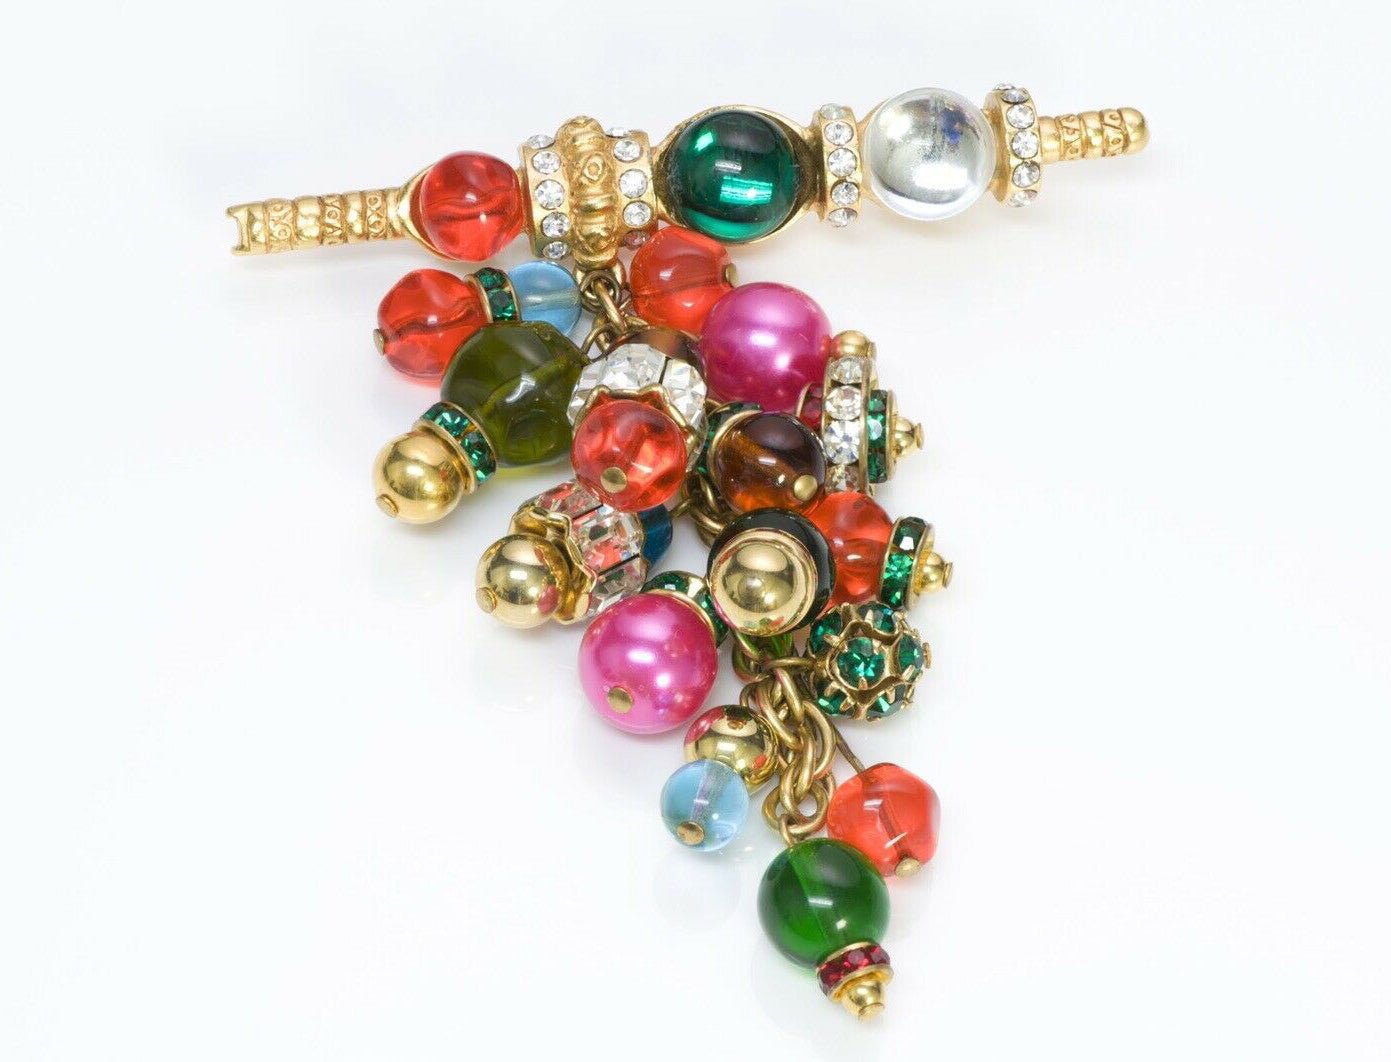 Vintage Christian Dior Boutique Glass Beads Brooch